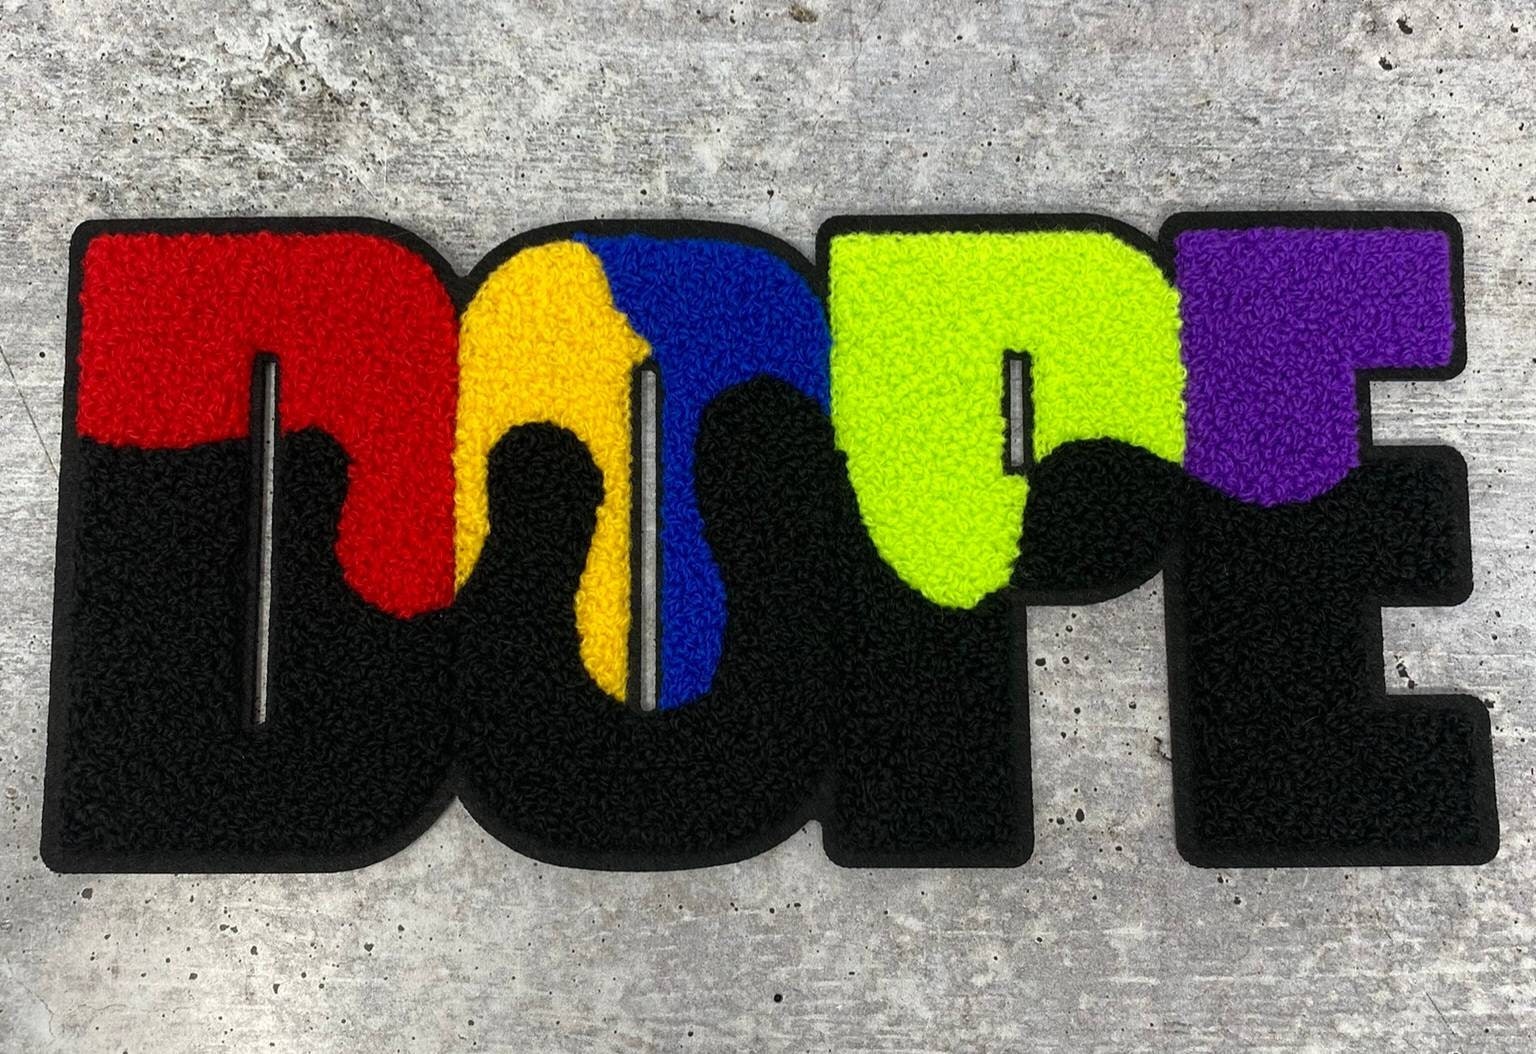 NEW, Large, 1-pc Colorful "DOPE" Chenille Iron On Patch, Size 9"x5", Large Patch for Varsity Jackets, Denim Jackets, Shirts, & Hoodies